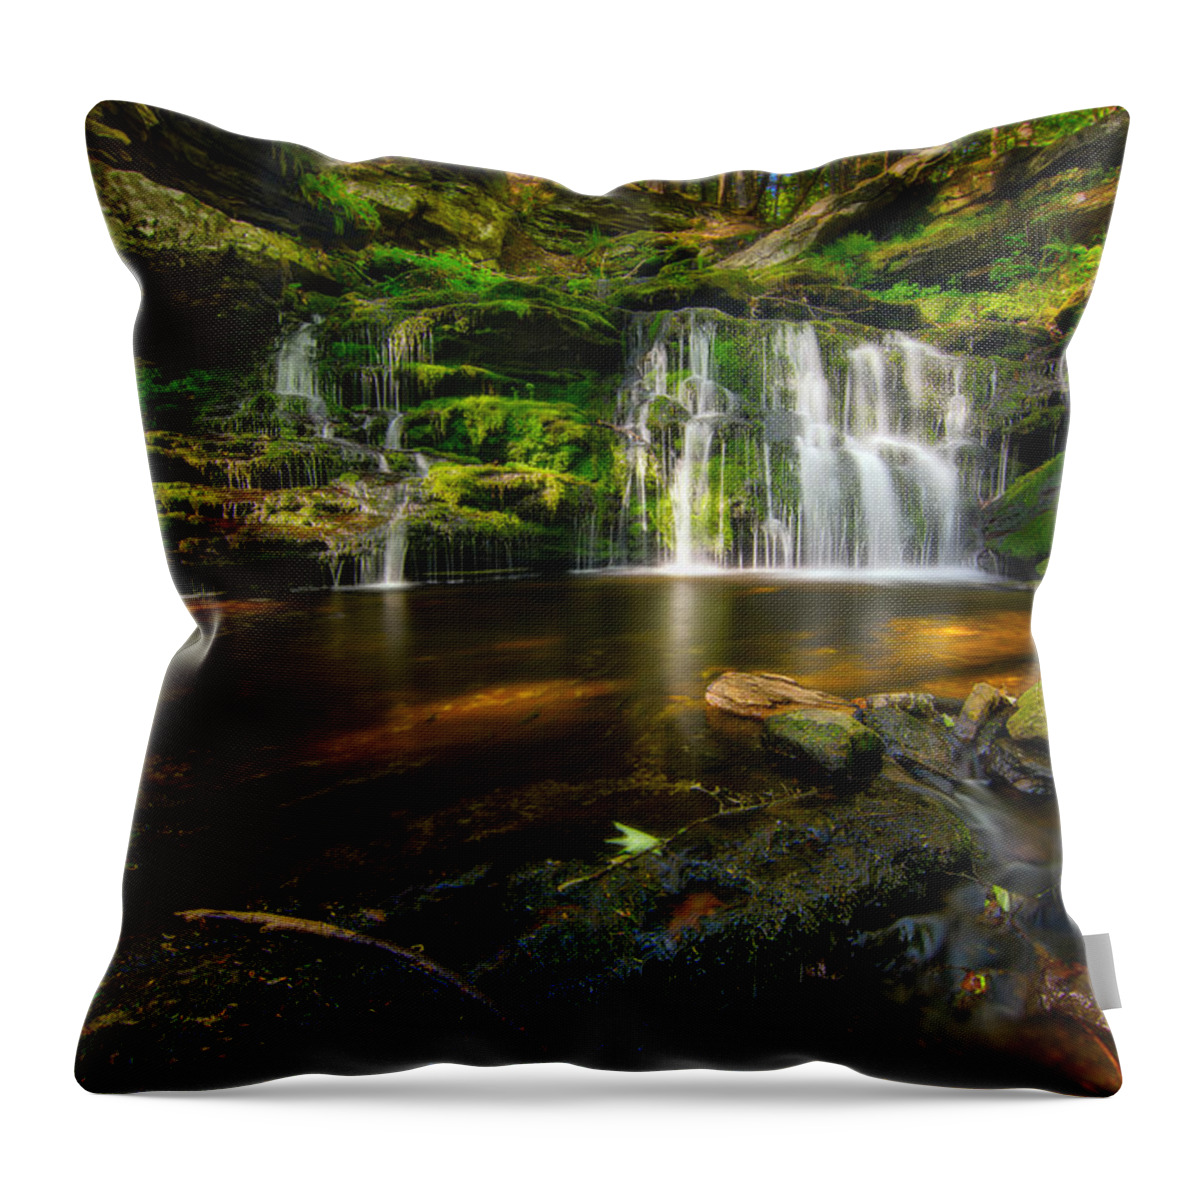 Landscape Throw Pillow featuring the photograph Waterfall at Day Pond State Park by Craig Szymanski